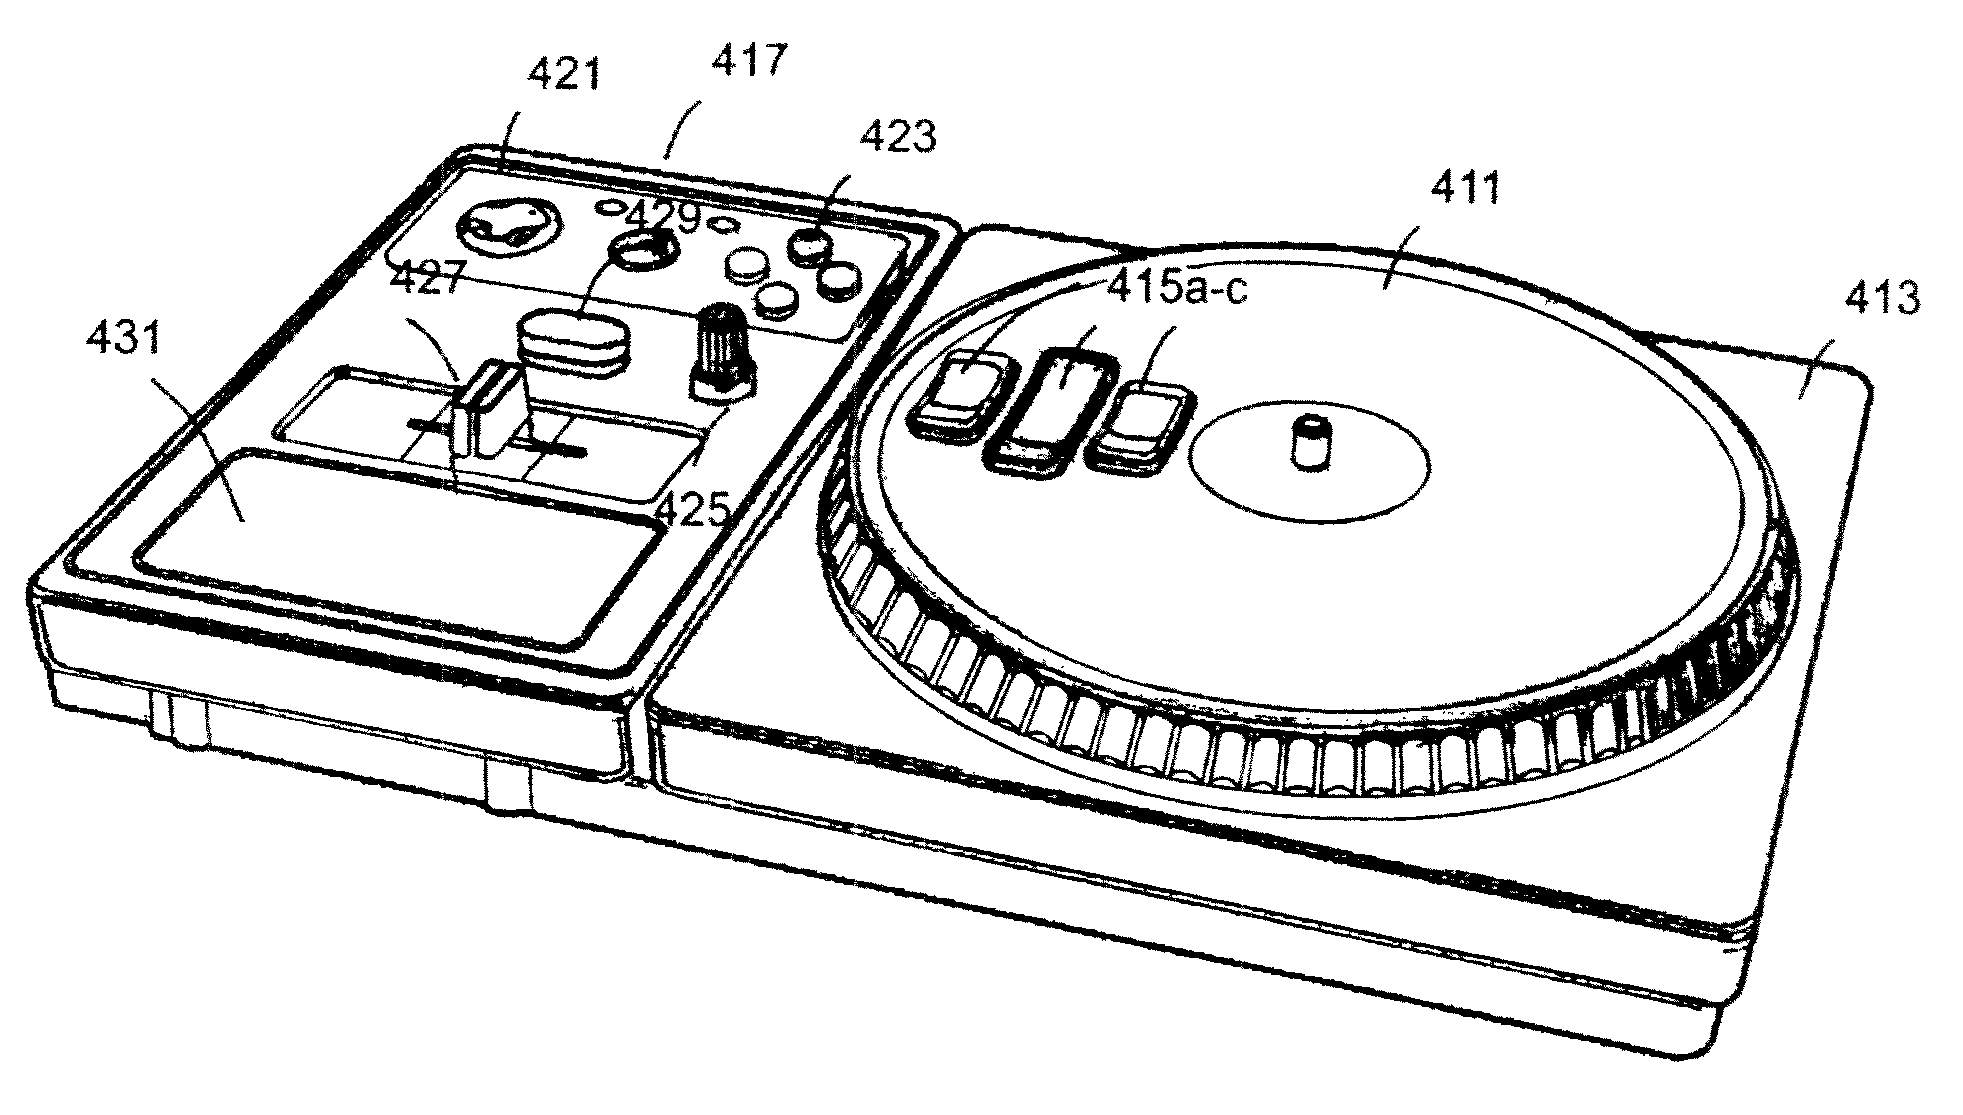 Disc jockey video game and controller